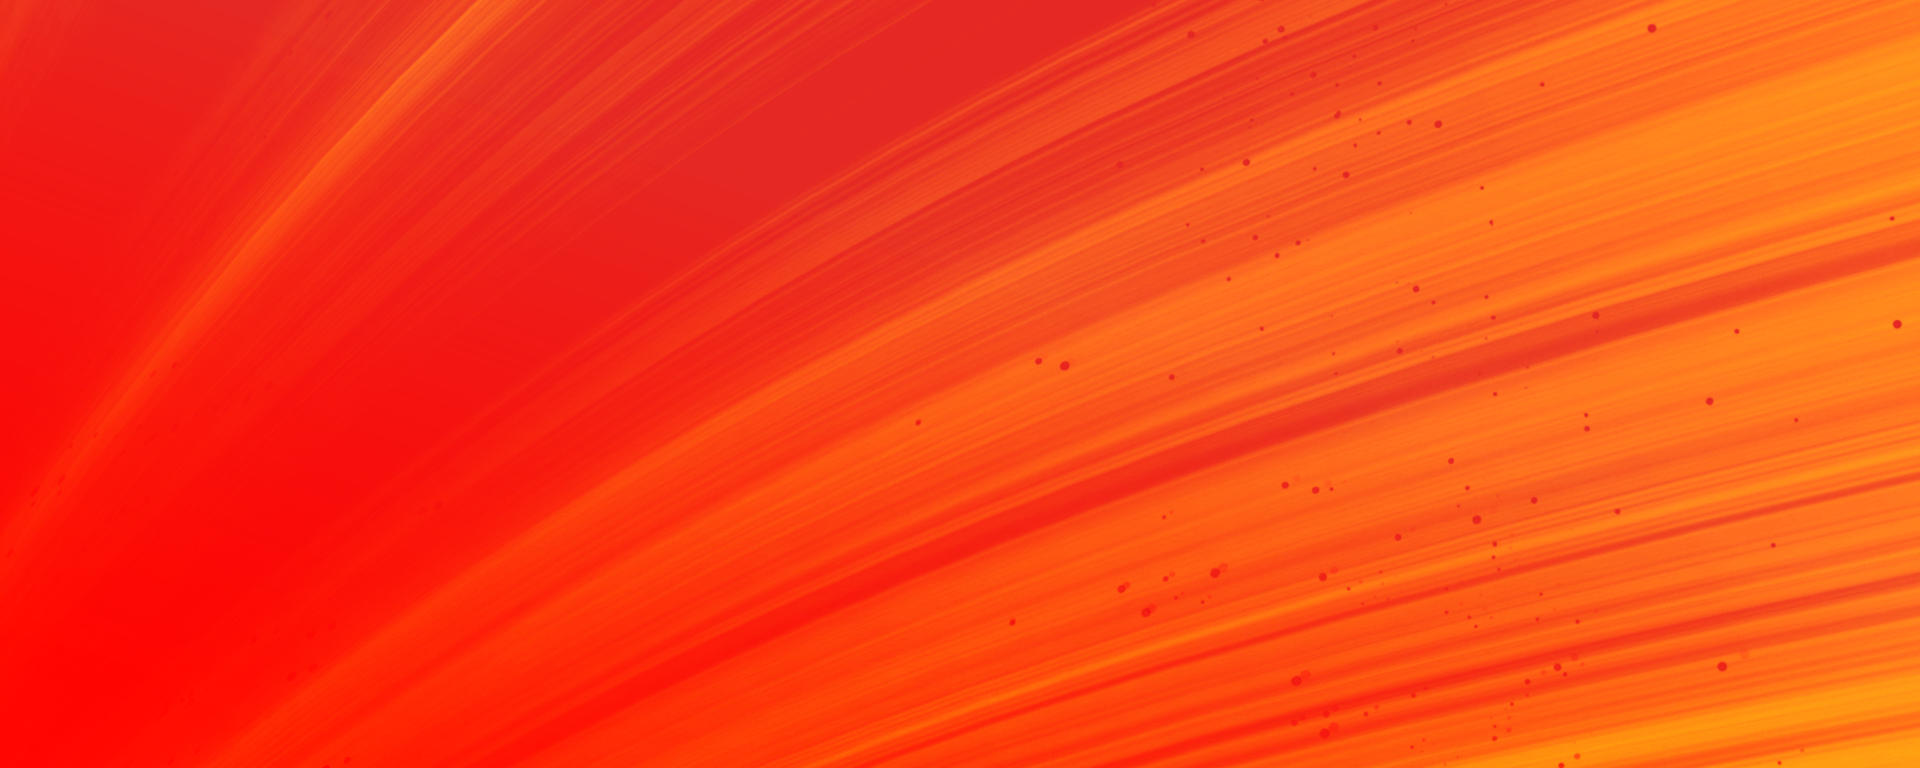 A background with yellow, orange and red stripes.